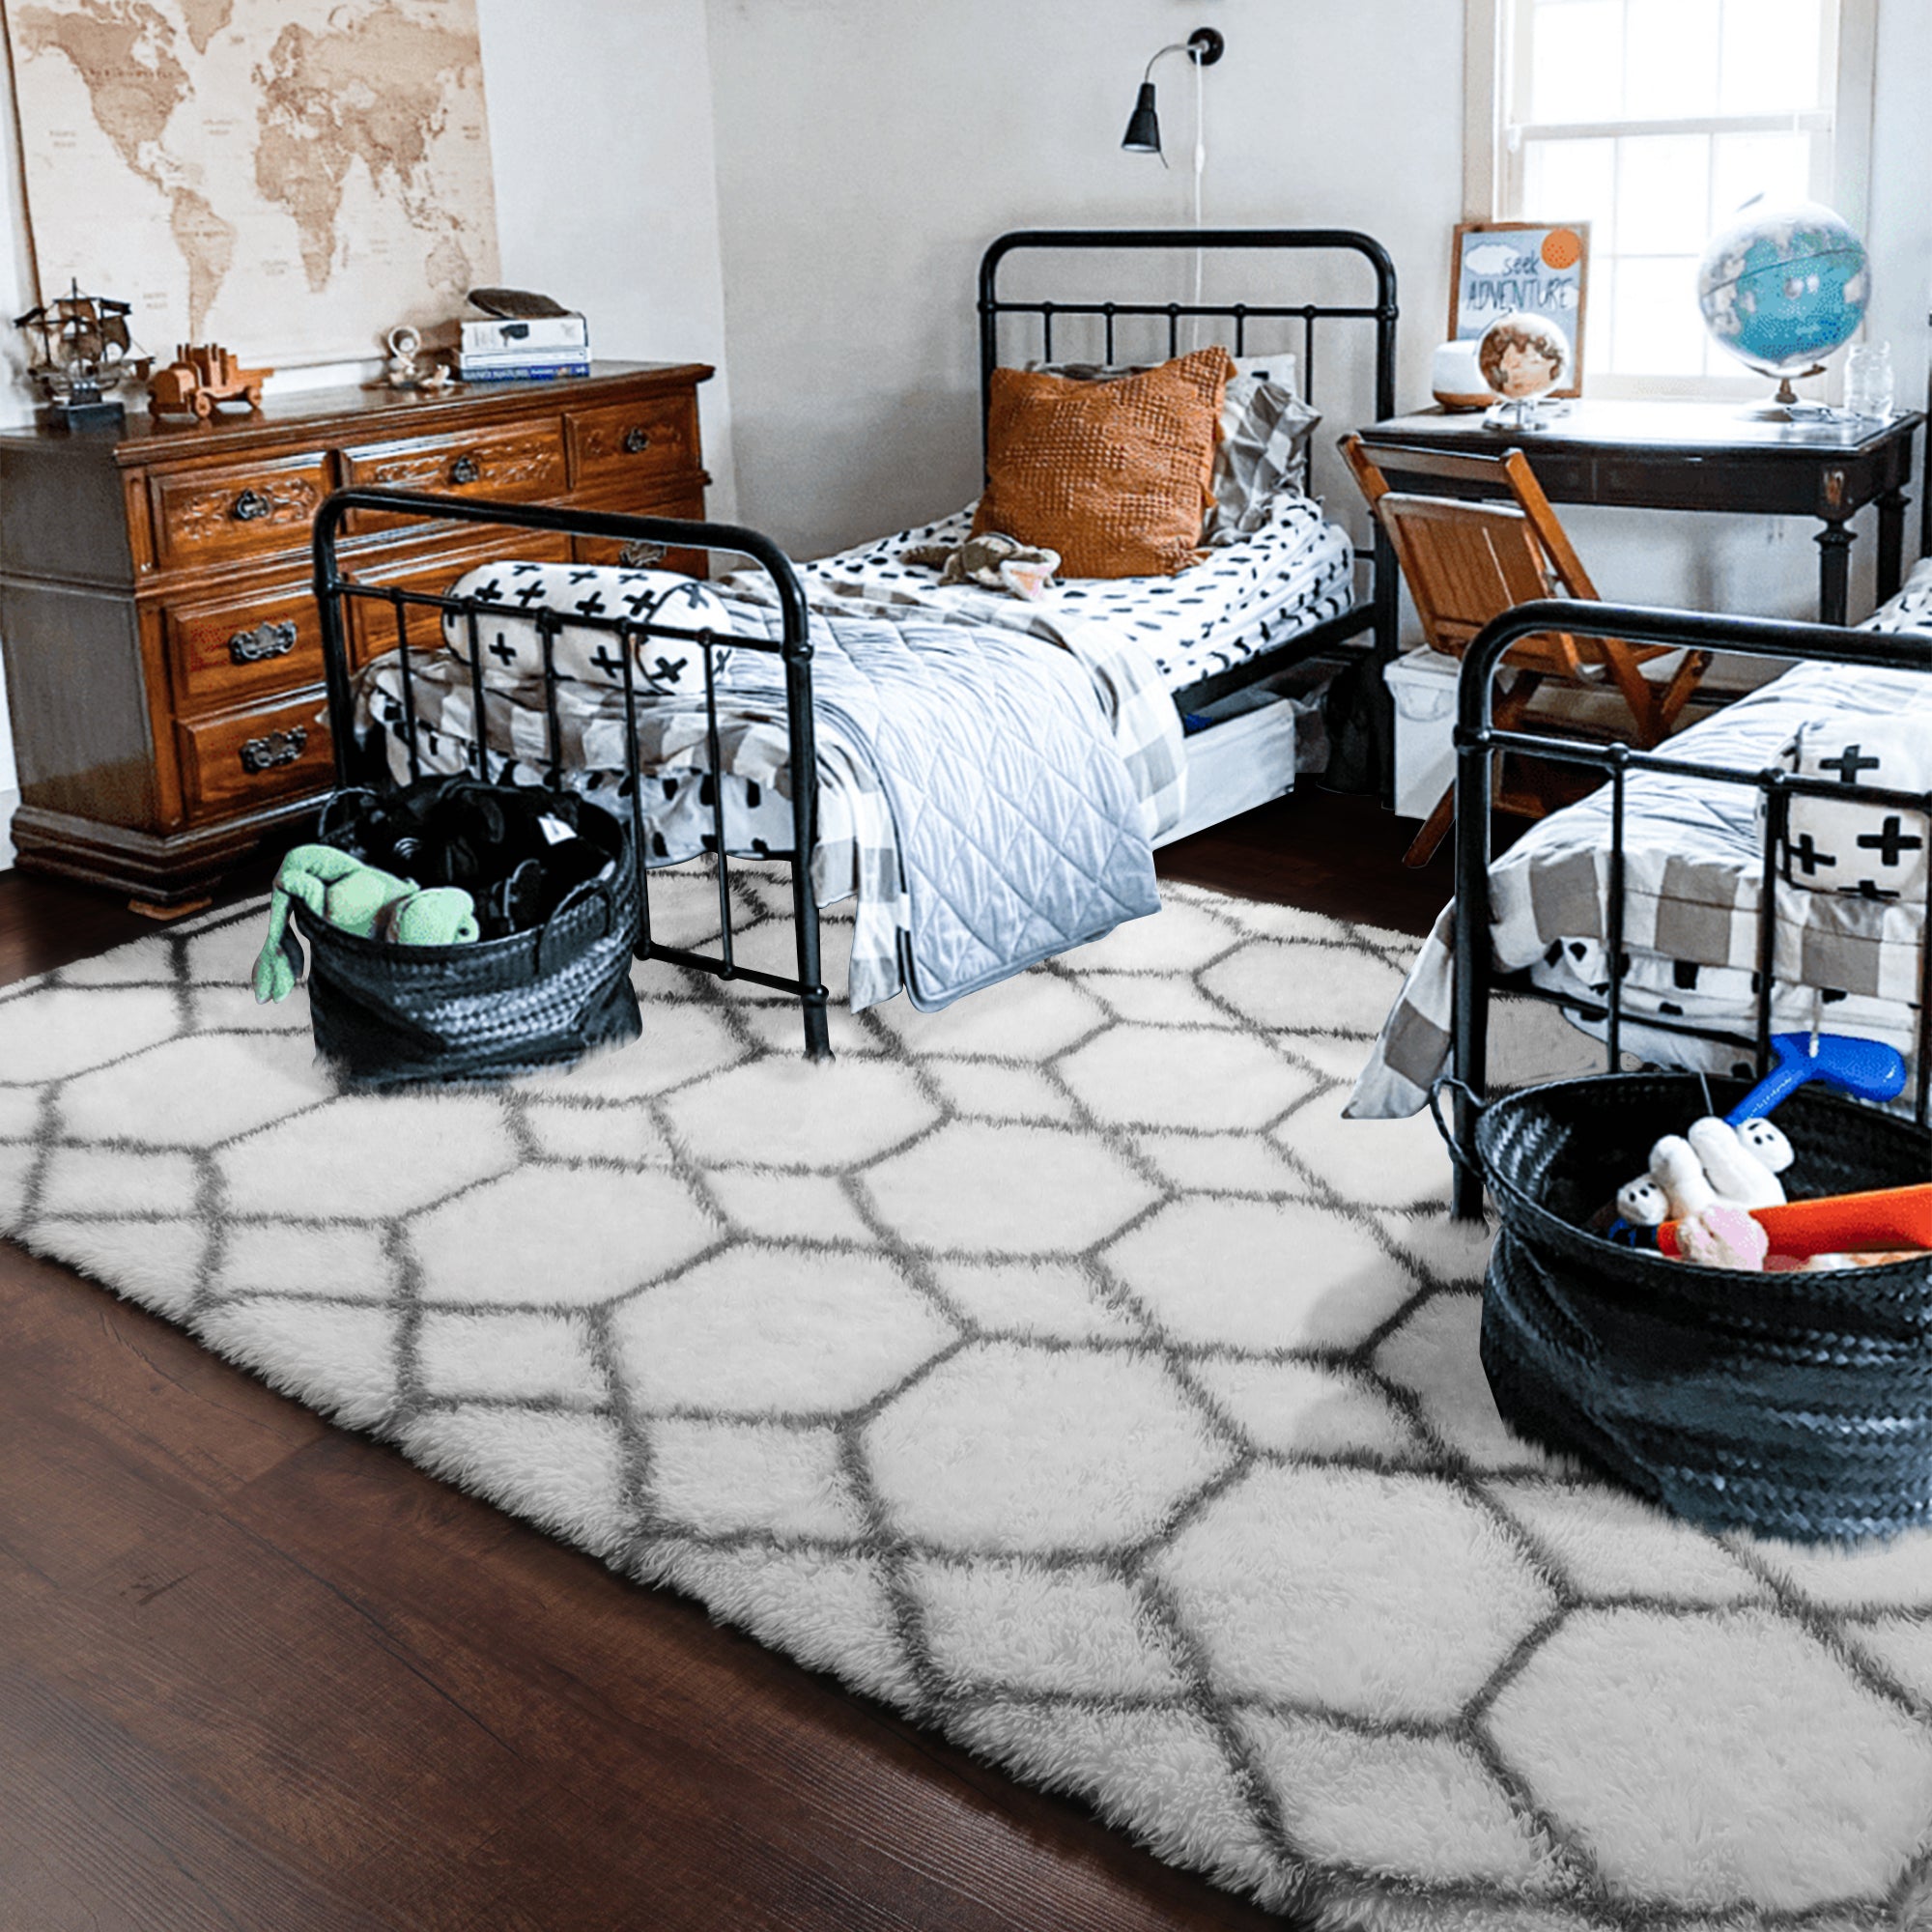 Extra Soft Fuzzy Rug Geometric Area Rug for Bedroom Living Room, White and Grey Rug